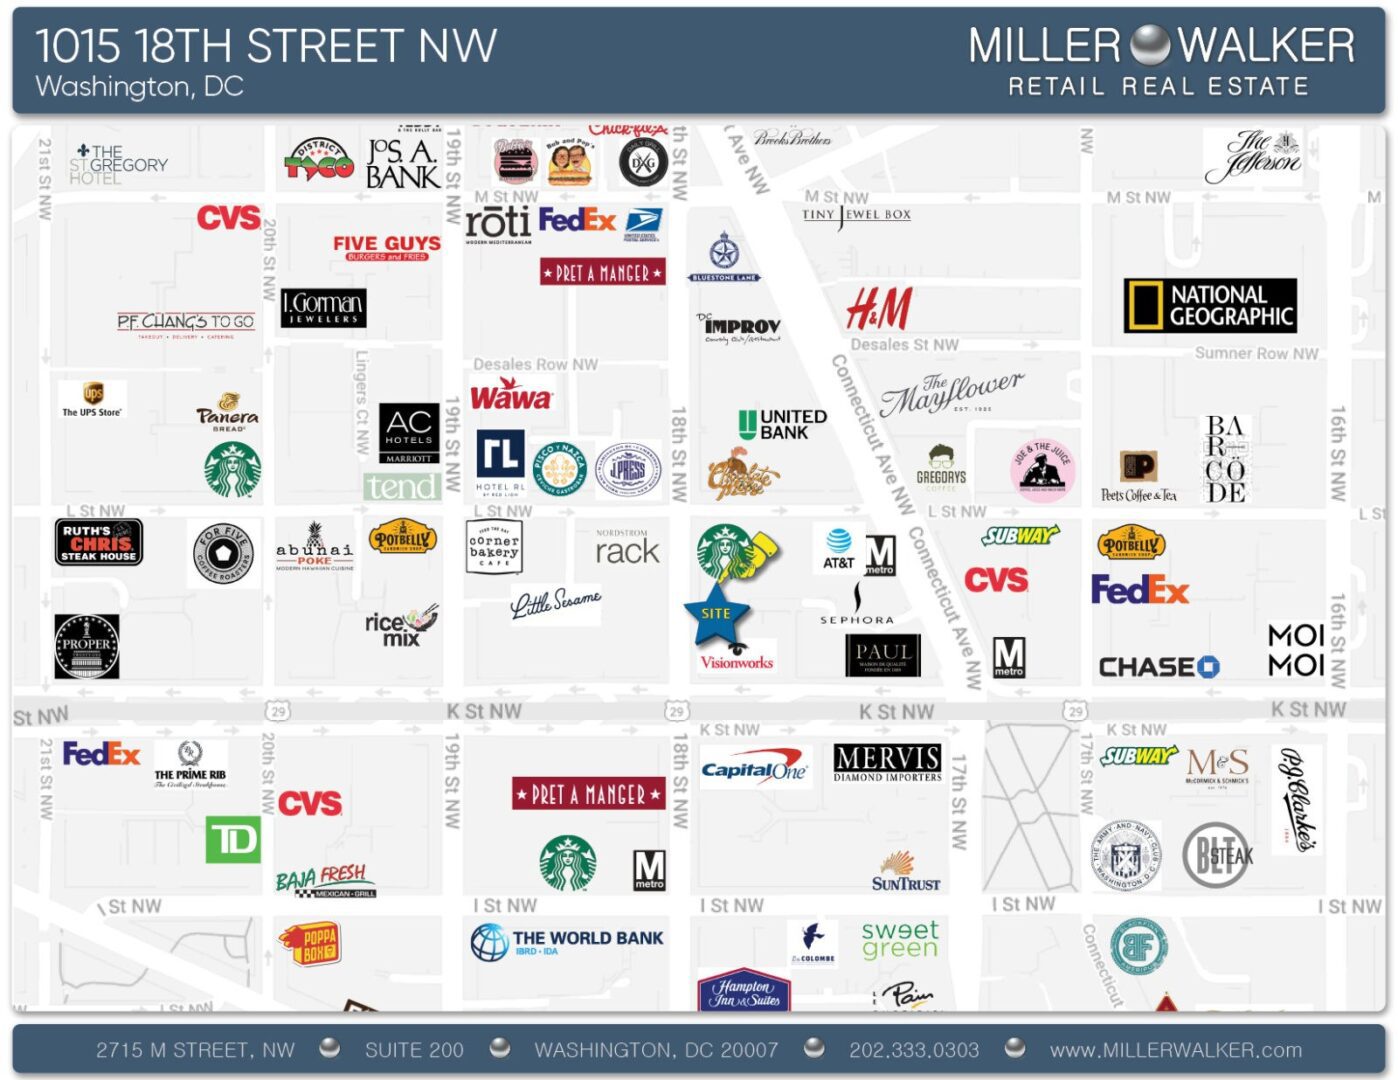 “1015 18th street nw retail map nearby stores